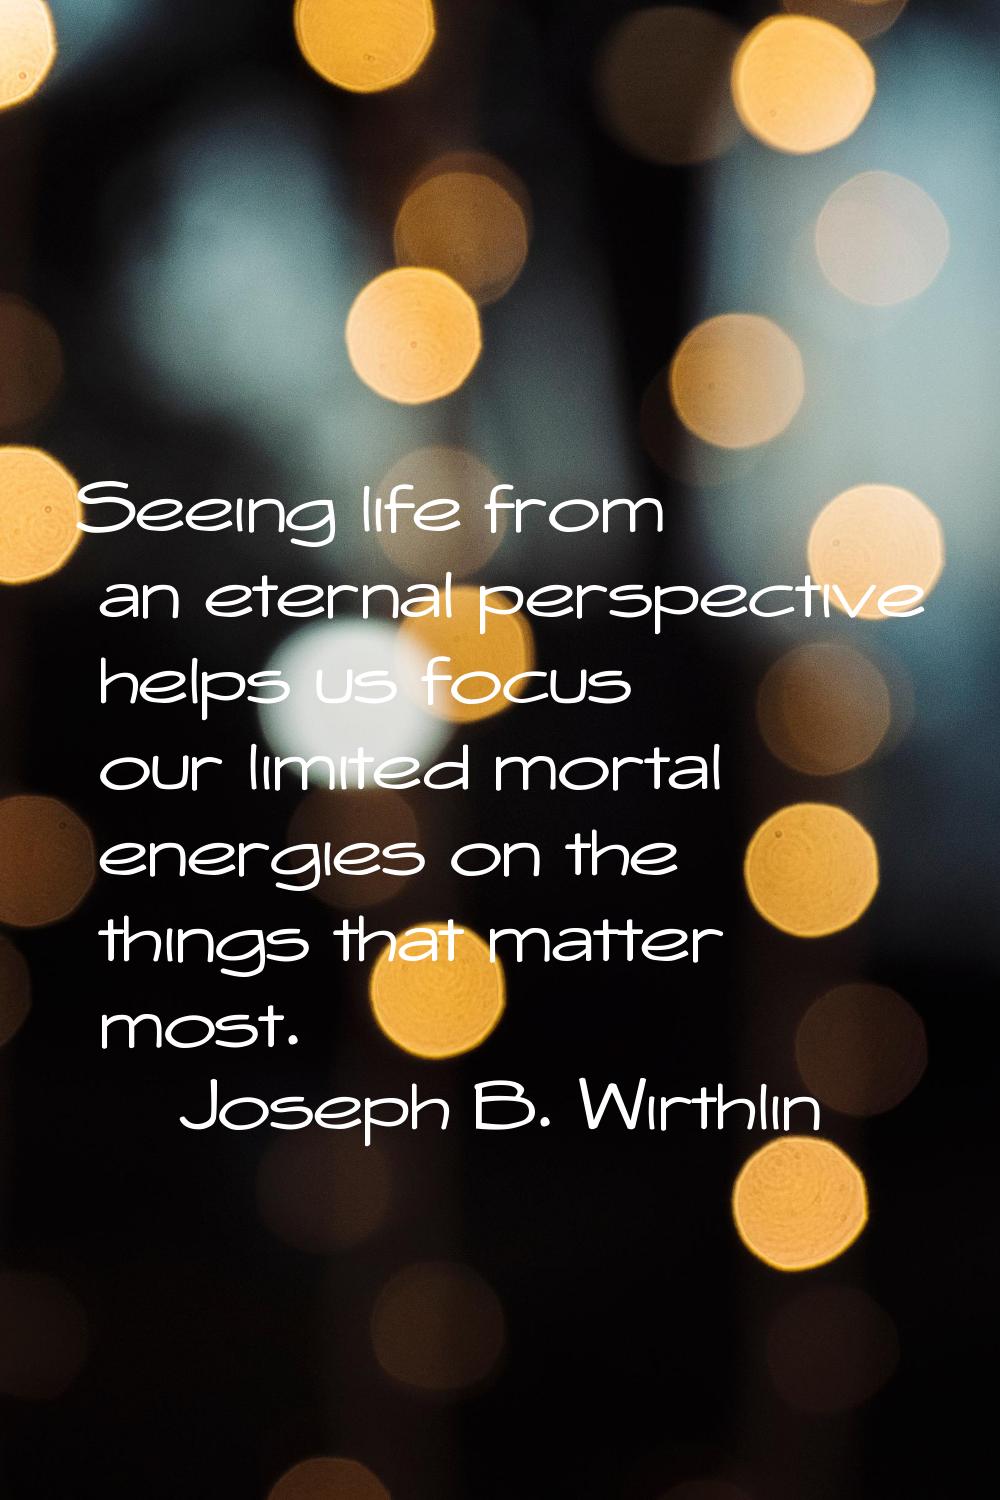 Seeing life from an eternal perspective helps us focus our limited mortal energies on the things th